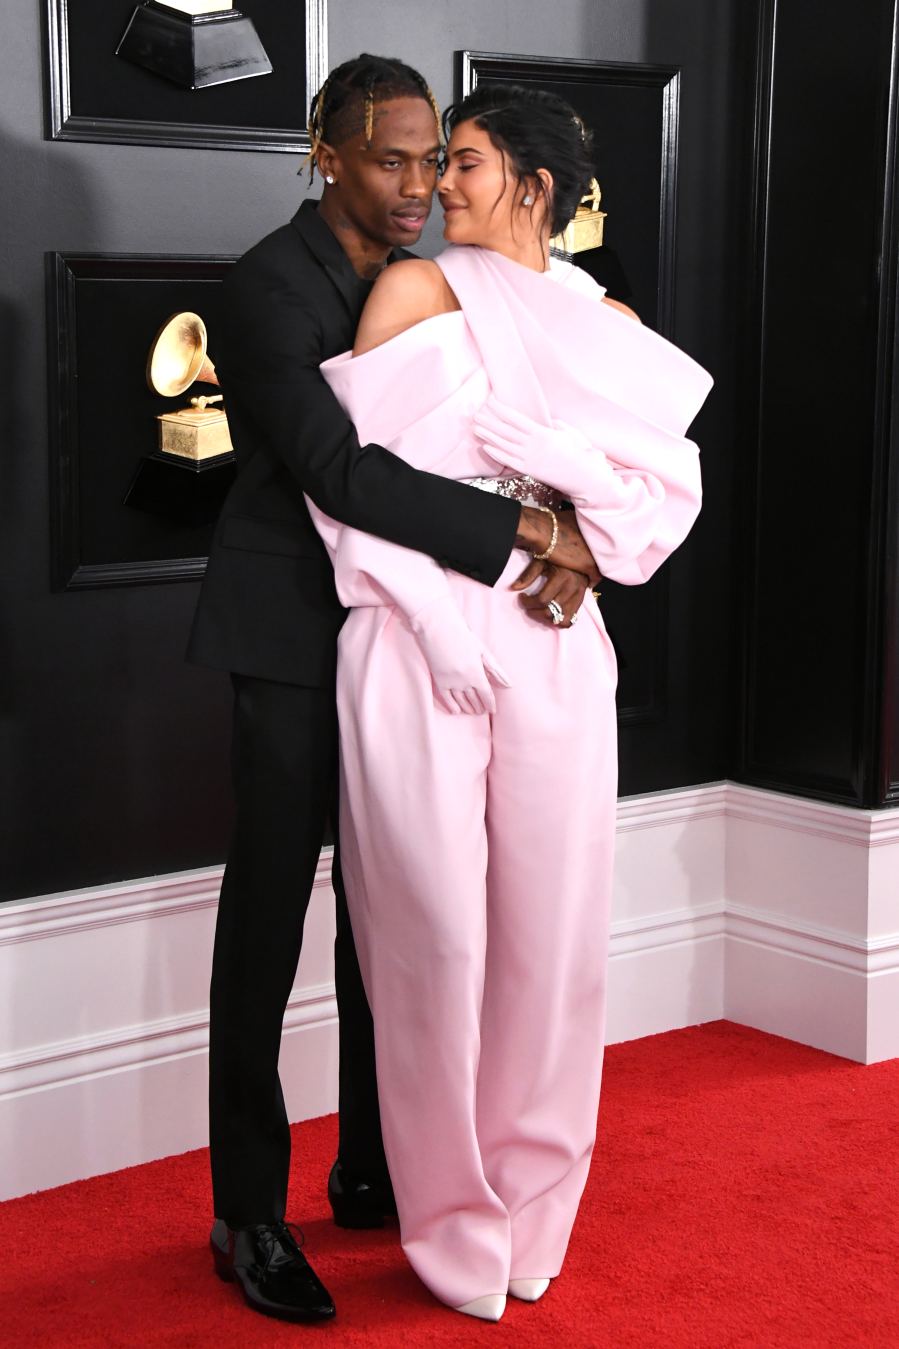 Grammys 2019: Kylie Jenner and Travis Scott Can’t Keep Their Hands Off Each Other